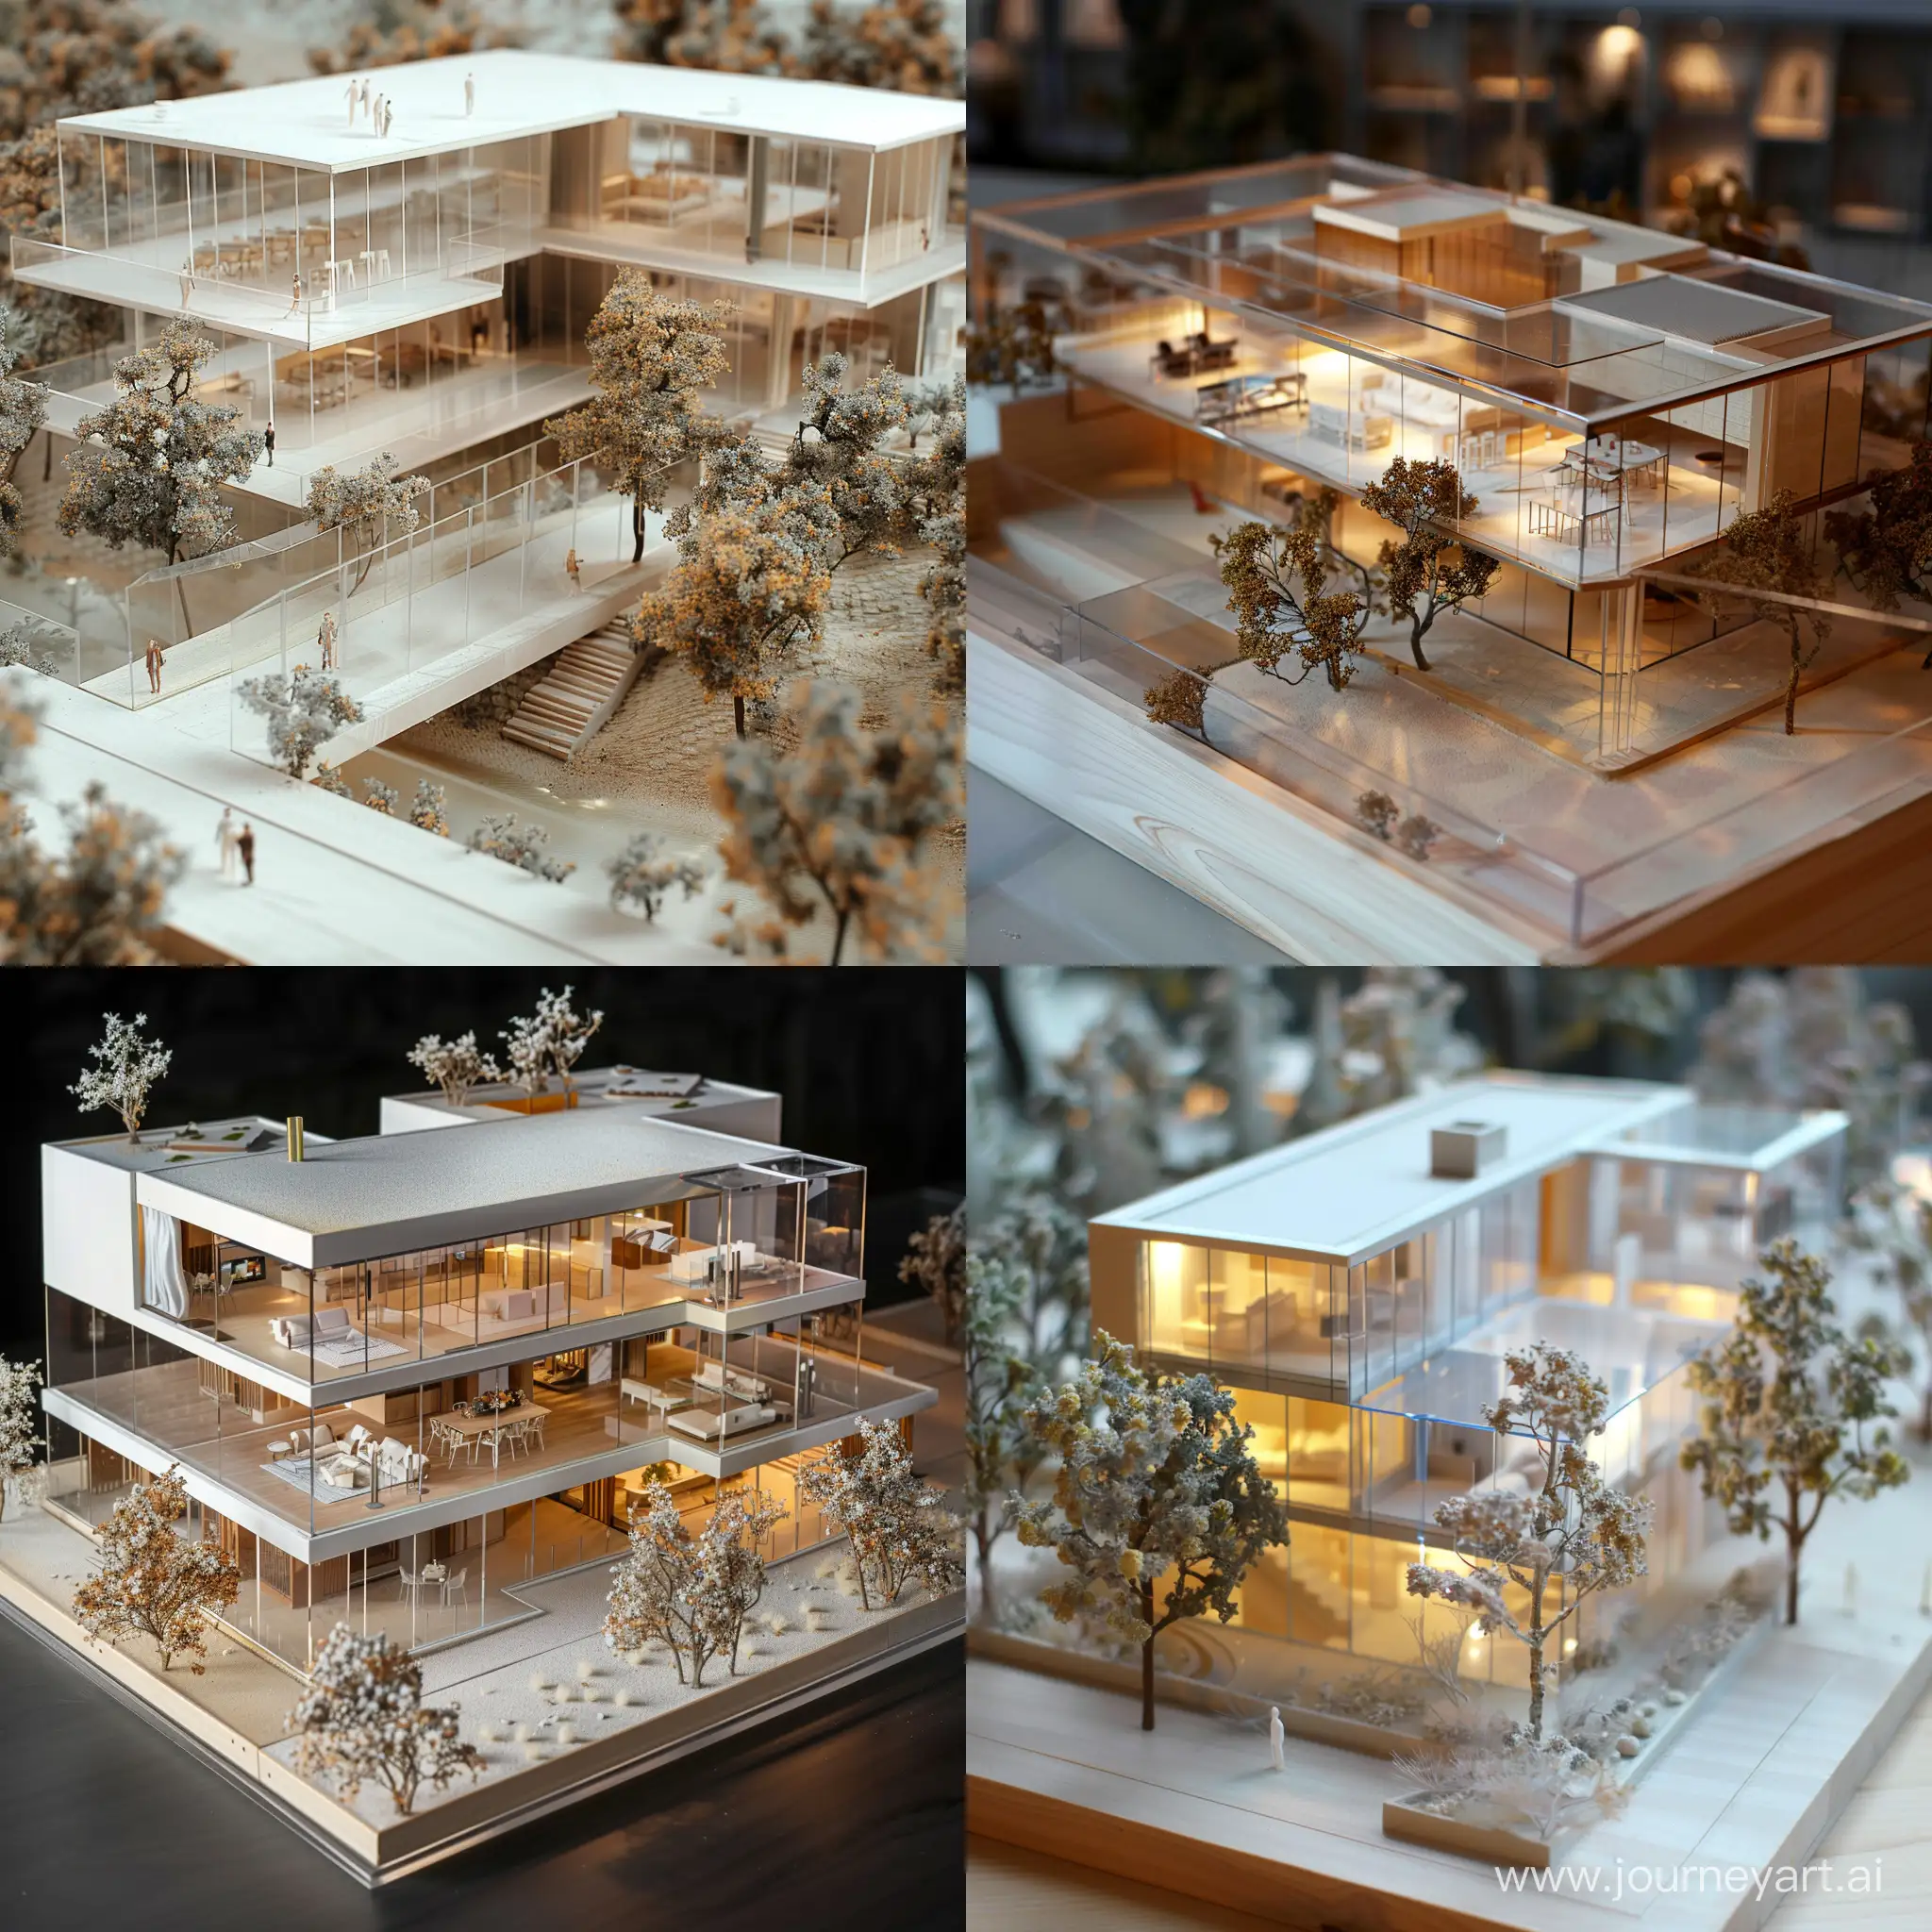 
A model of a villa with transparent glass corridors through which the interior spaces are visible ,scale model , high quality 